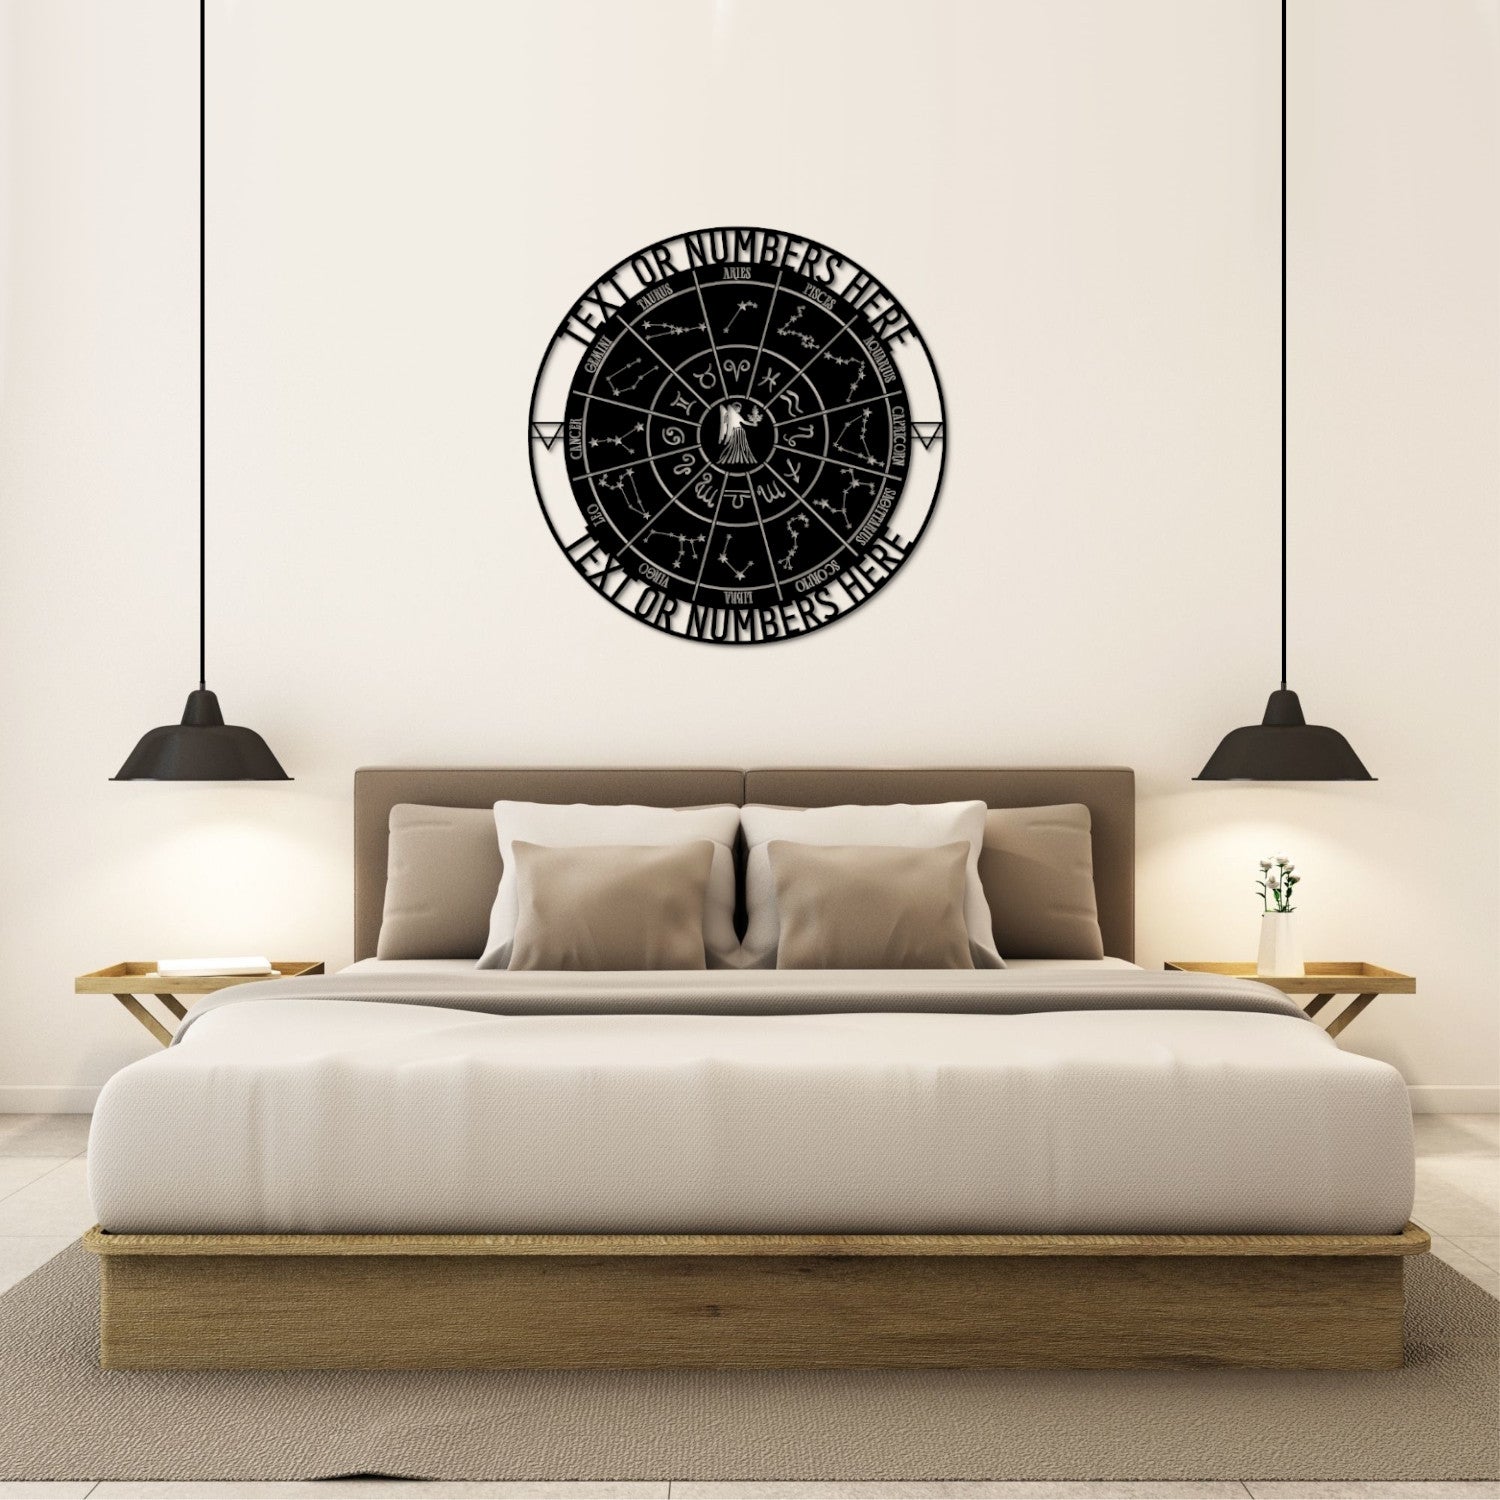 Personalized Virgo Zodiac Wheel Name Metal Sign Gift. Custom Made Astrology Wall Decor. Celestial Gifts. Decorative Virgo Star Sign Hanging